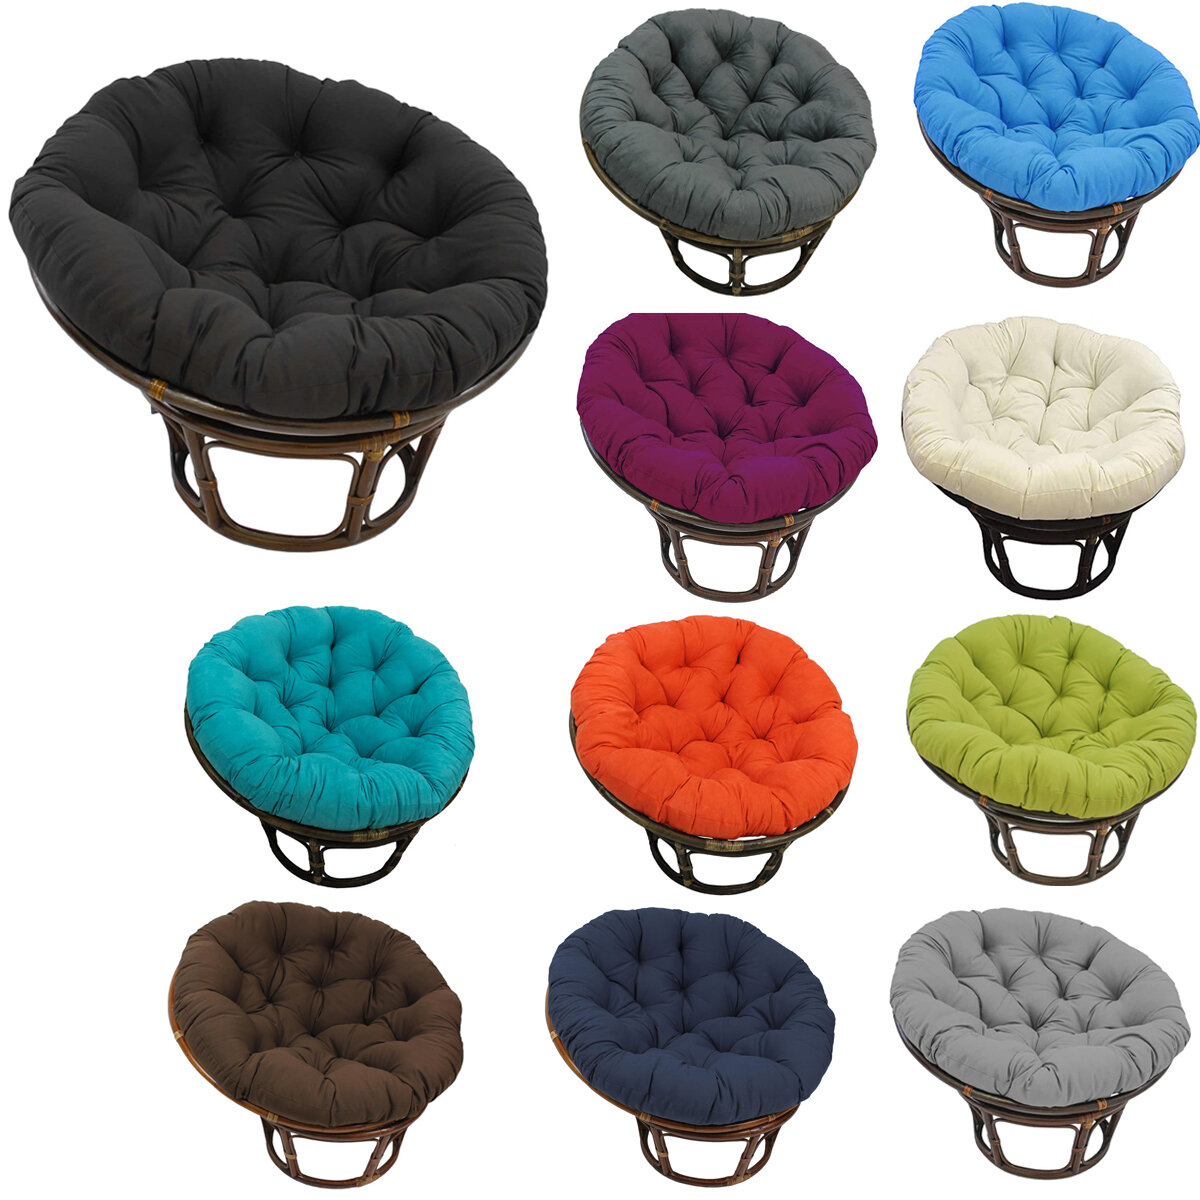 Single Sofa Cushion Hanging Chair Cushion Thick Polyester Soft Indoor Outdoor Cradle Chair Cushion